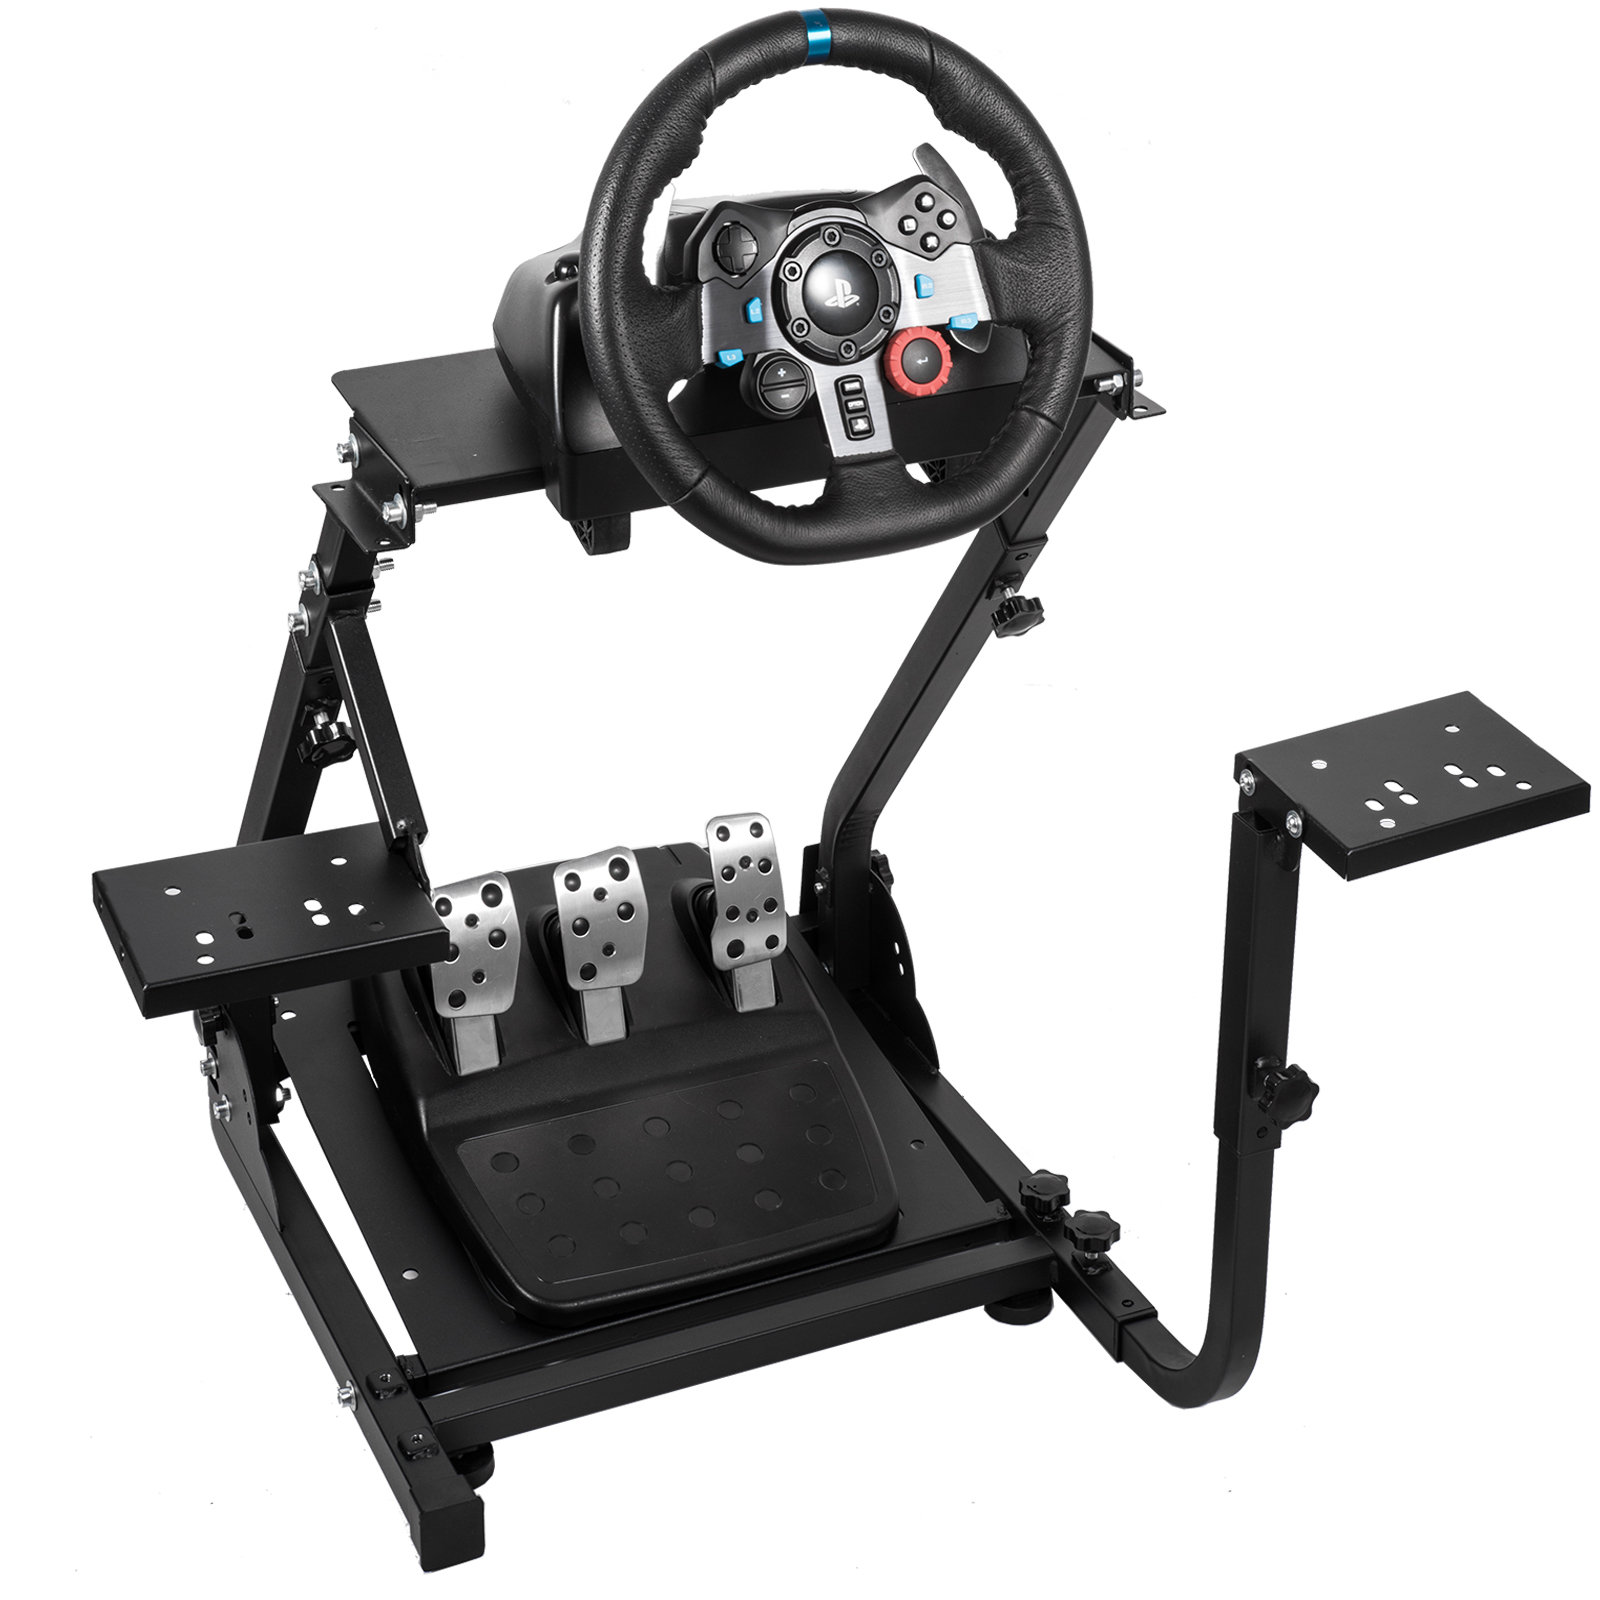 Minneer Racing Simulator Cockpit with Racing Seat V2 Support Game Support Stand Up Simulation Driving Bracket for Logitech G29,G27,G25, G923 Racing St